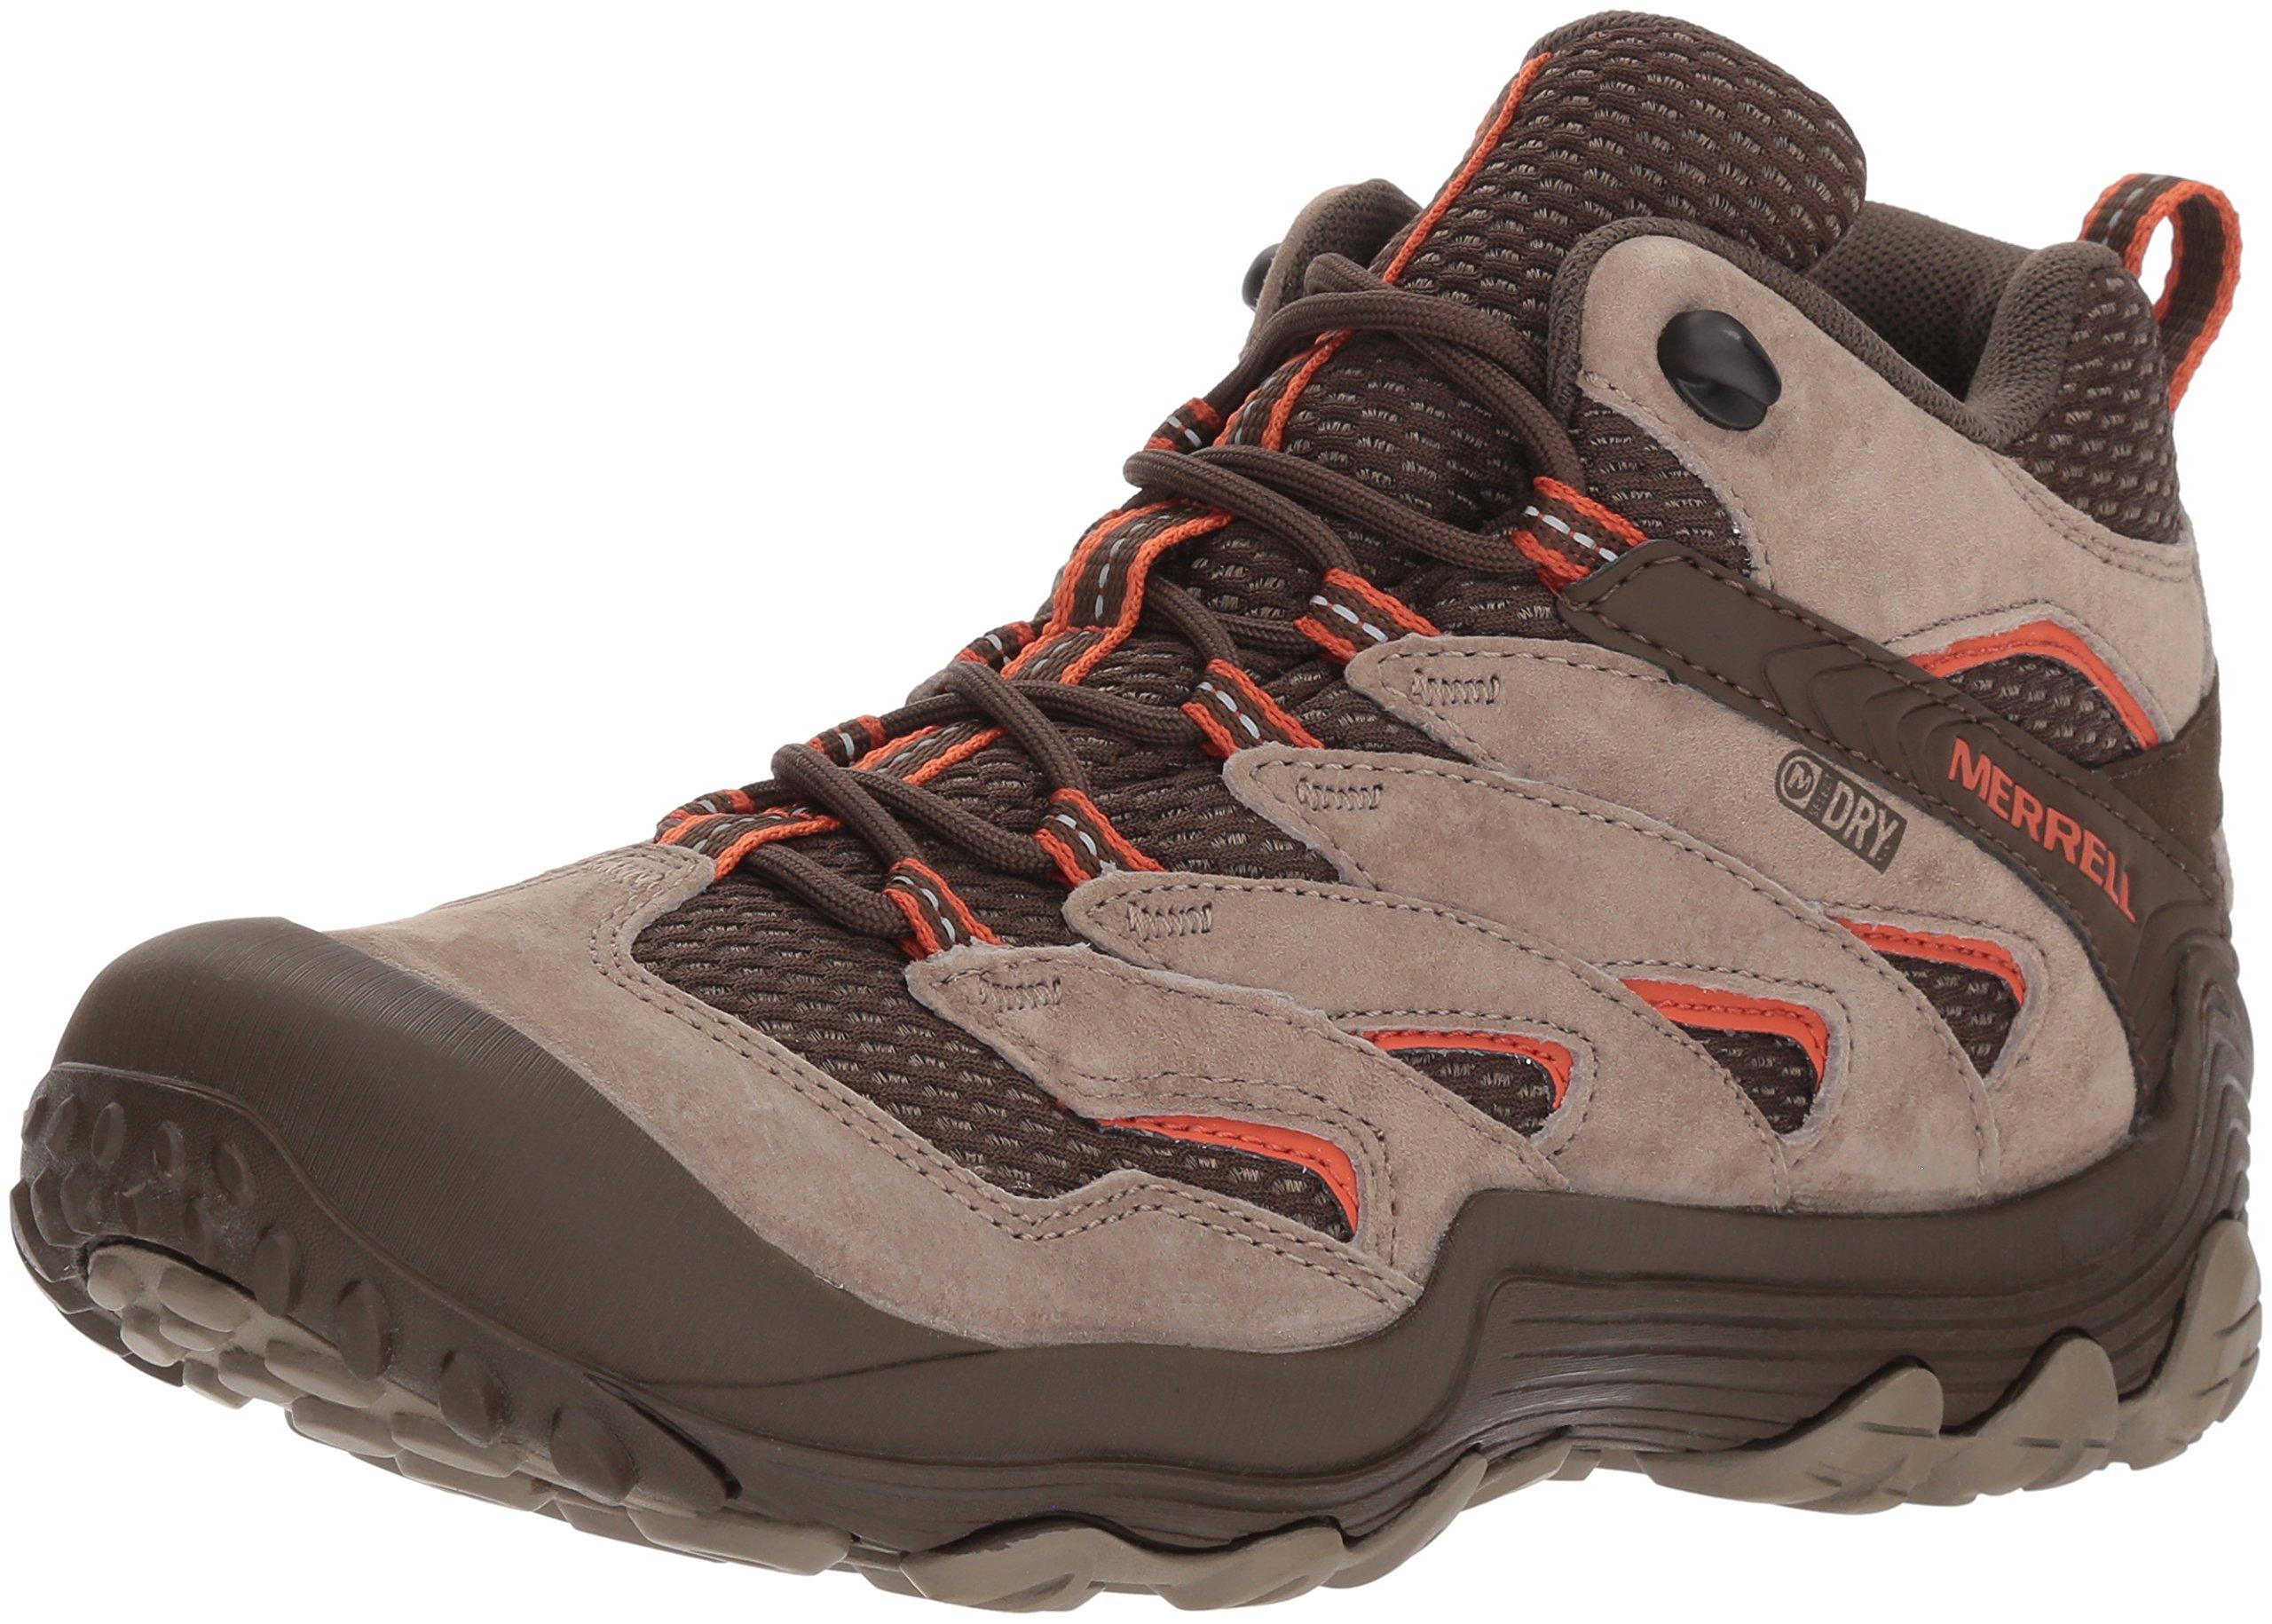 Merrell Suede Chameleon 7 Limit Mid Waterproof Hiking Boot in Brown - Lyst